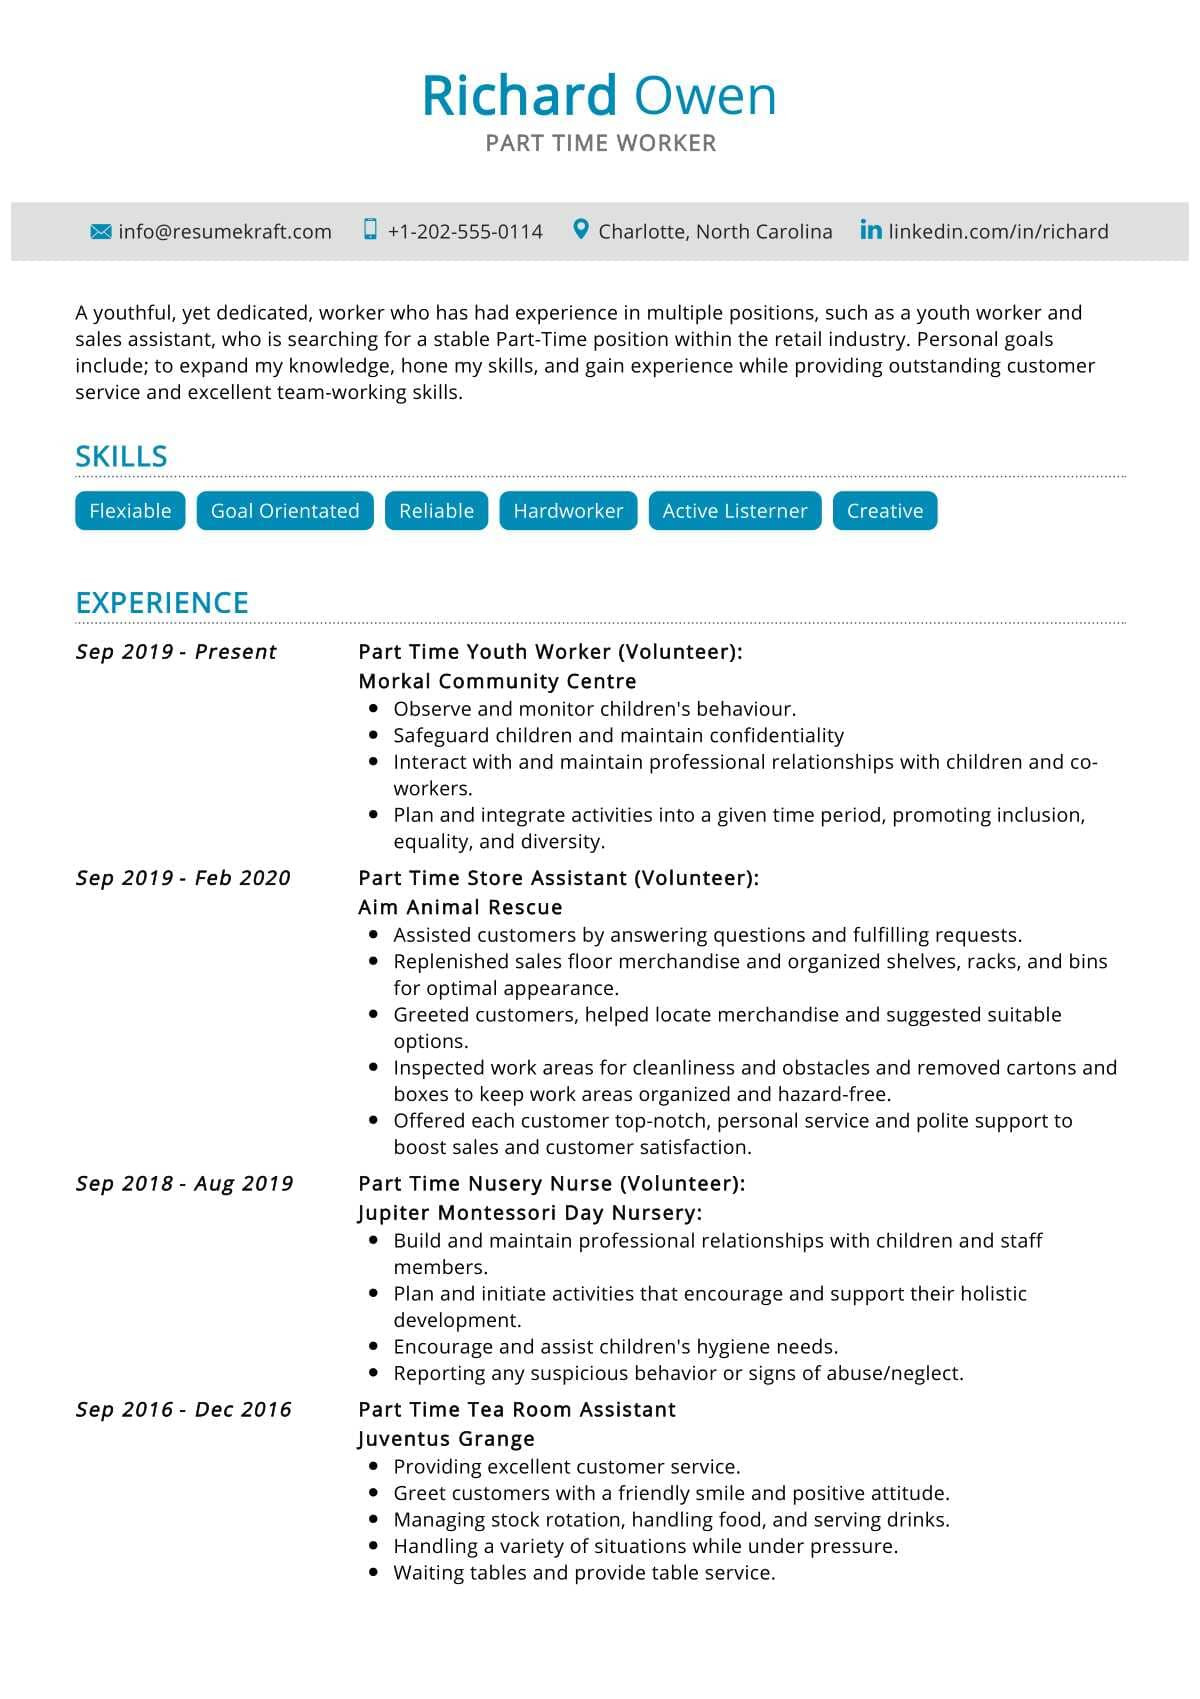 Part Time Job Resume Sample Canada Part-time Job Resume Sample 2021 Writing Tips – Resumekraft